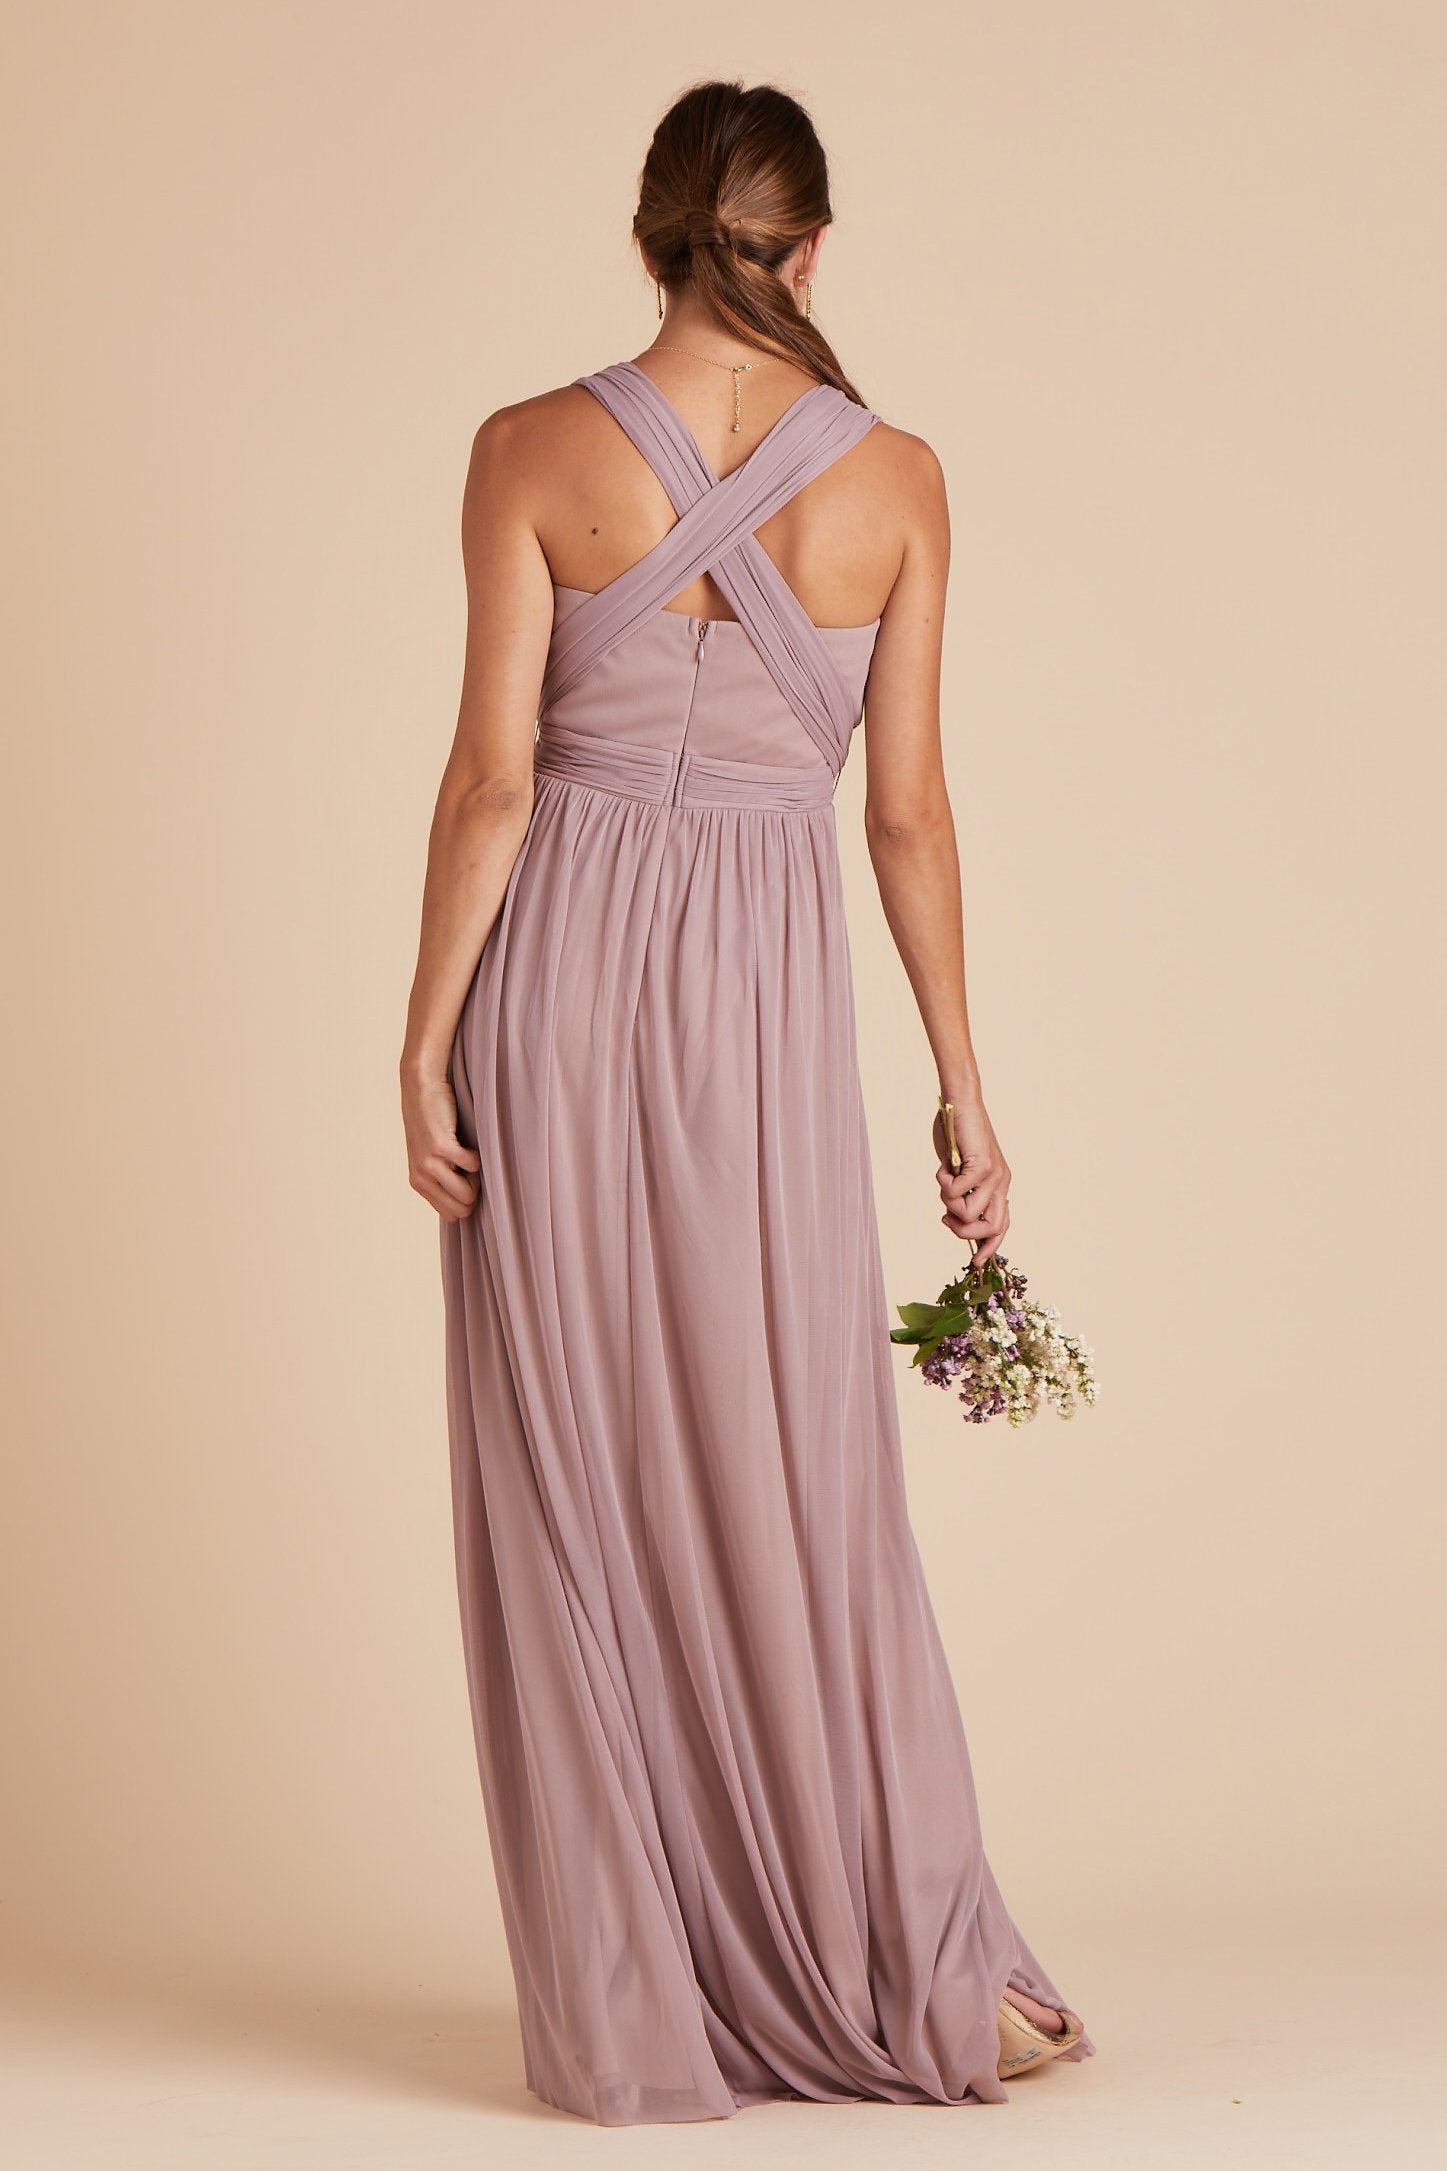 Chicky convertible bridesmaid dress in mauve purple mesh by Birdy Grey, back view